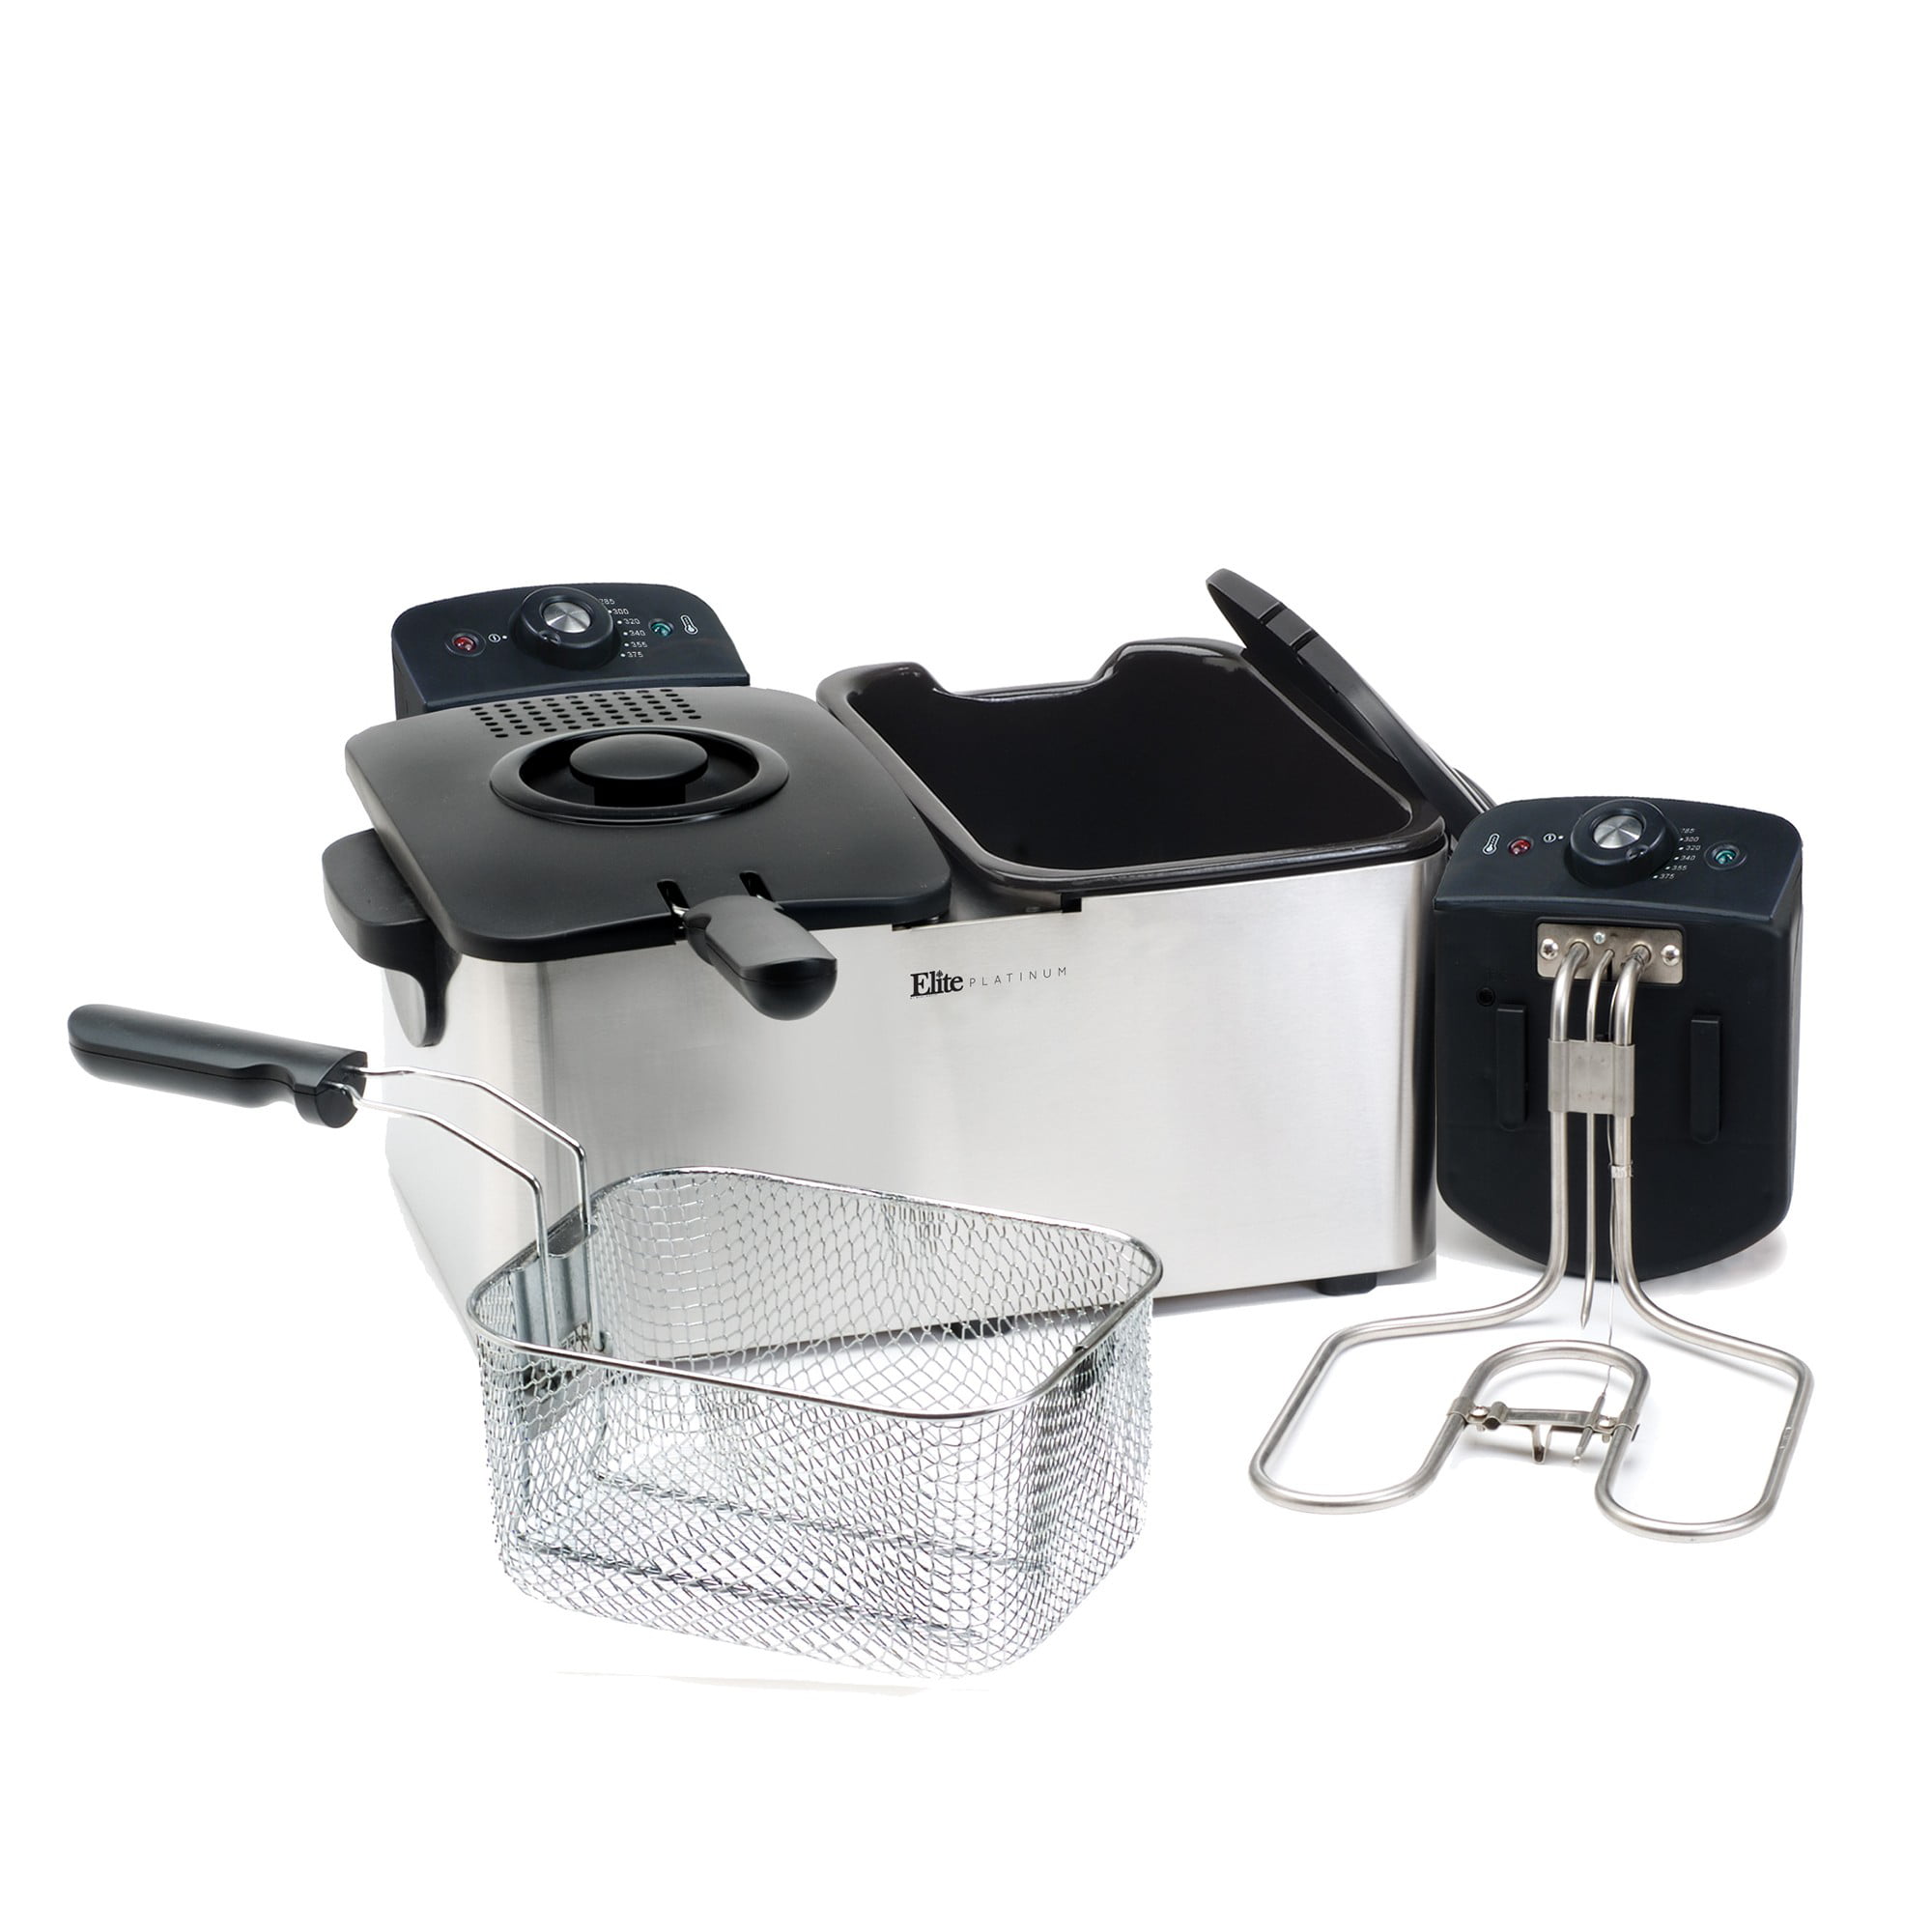 6 Cup Deep Fryer, Stainless Steel - Model 35041PS